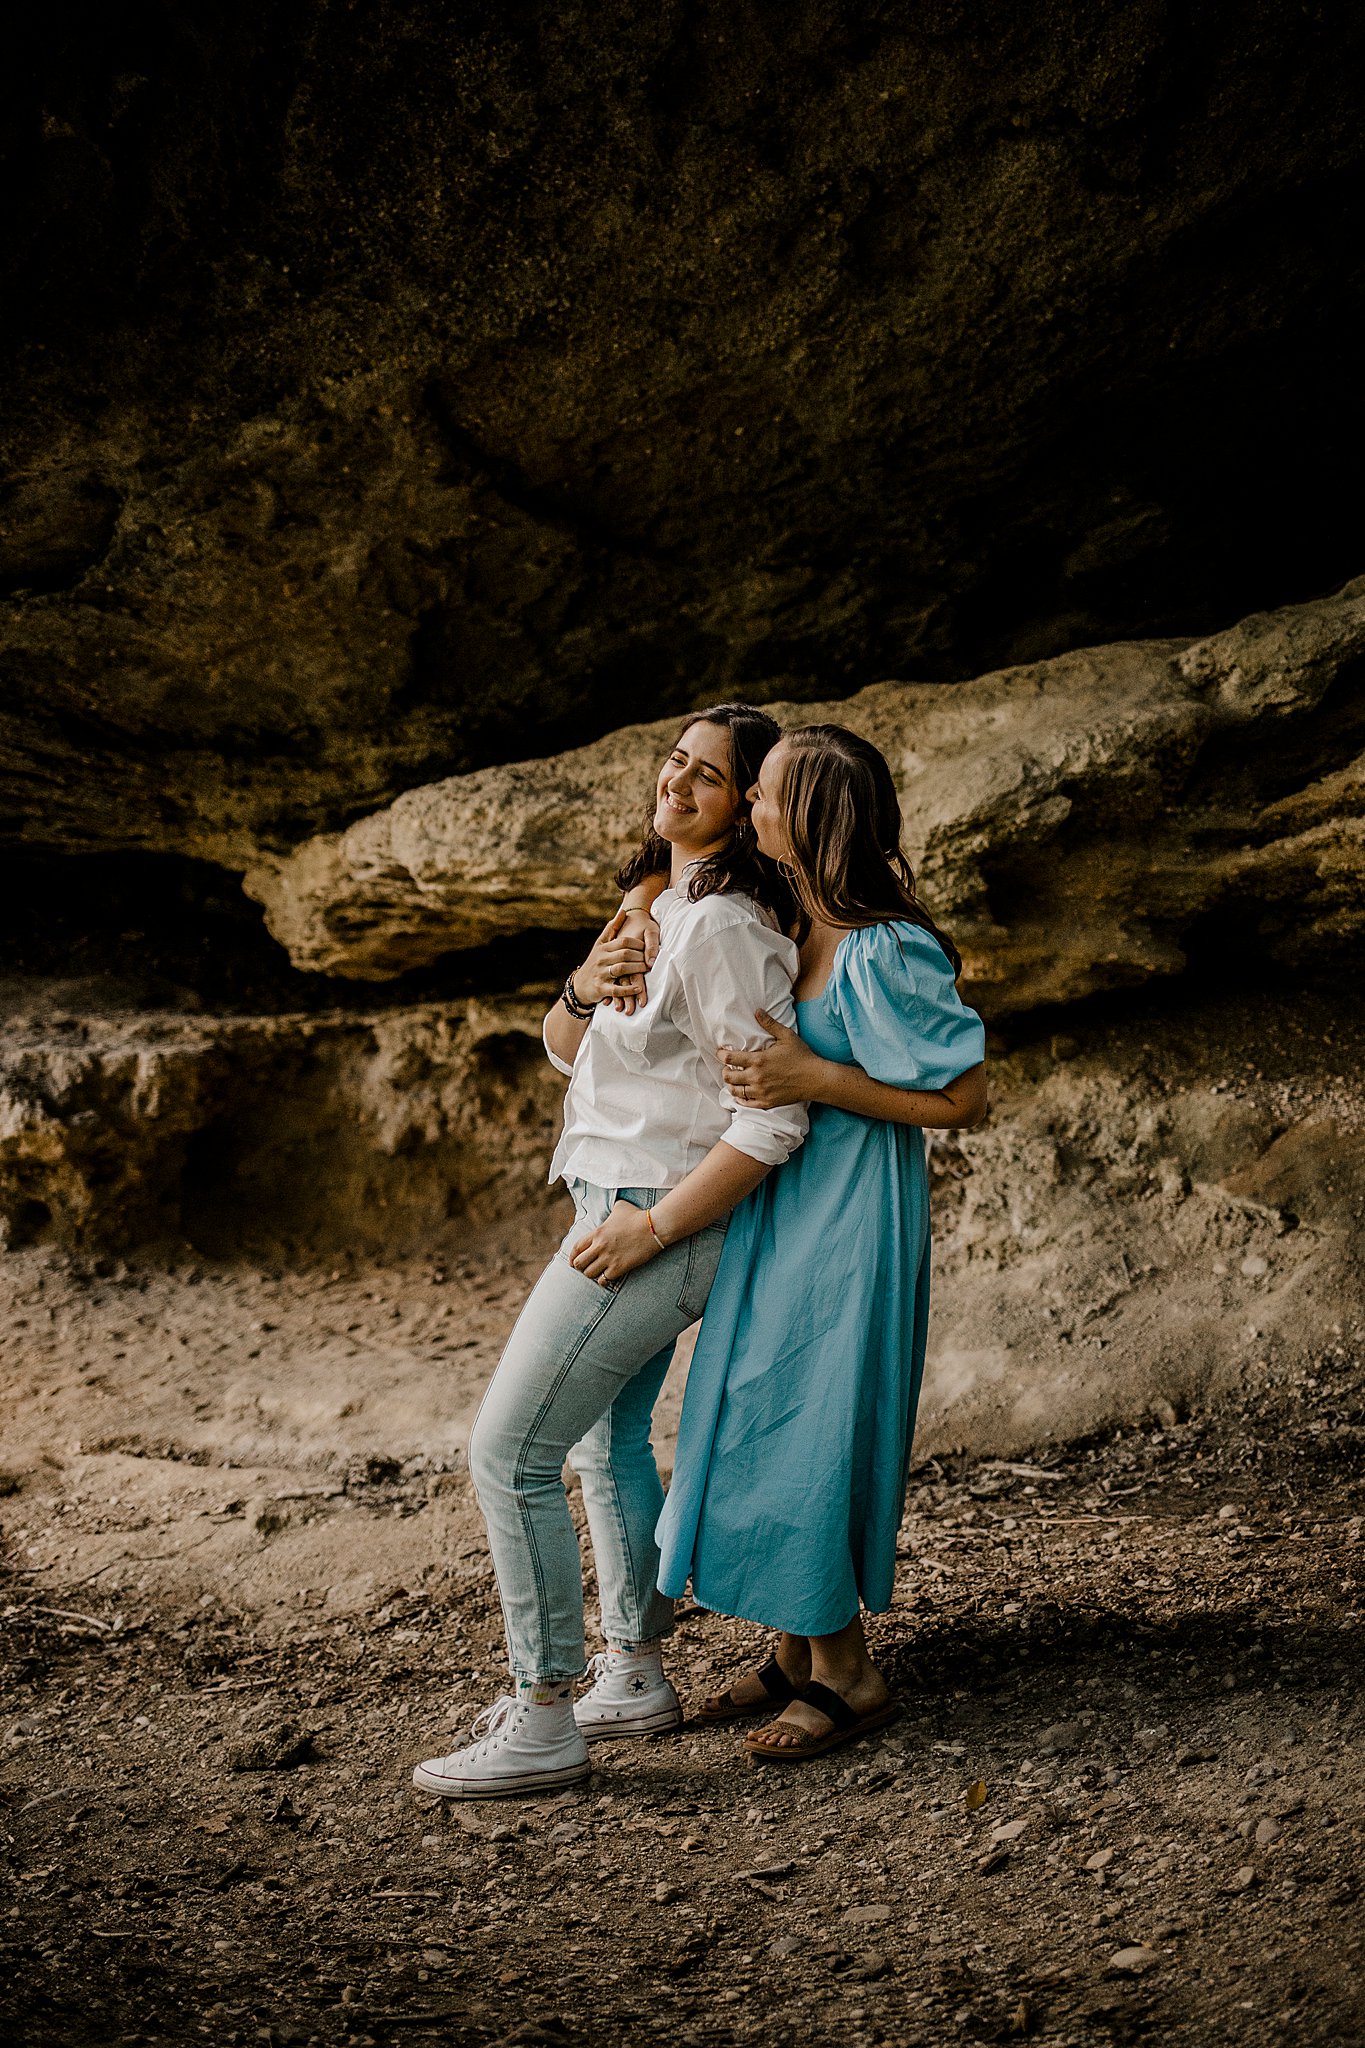 Samantha Mitchell, an LGBTQ Engagement photographer captures two women at Prophet's Rock in Indiana. The two women are snuggling together amongst large rocks. They are kissing.